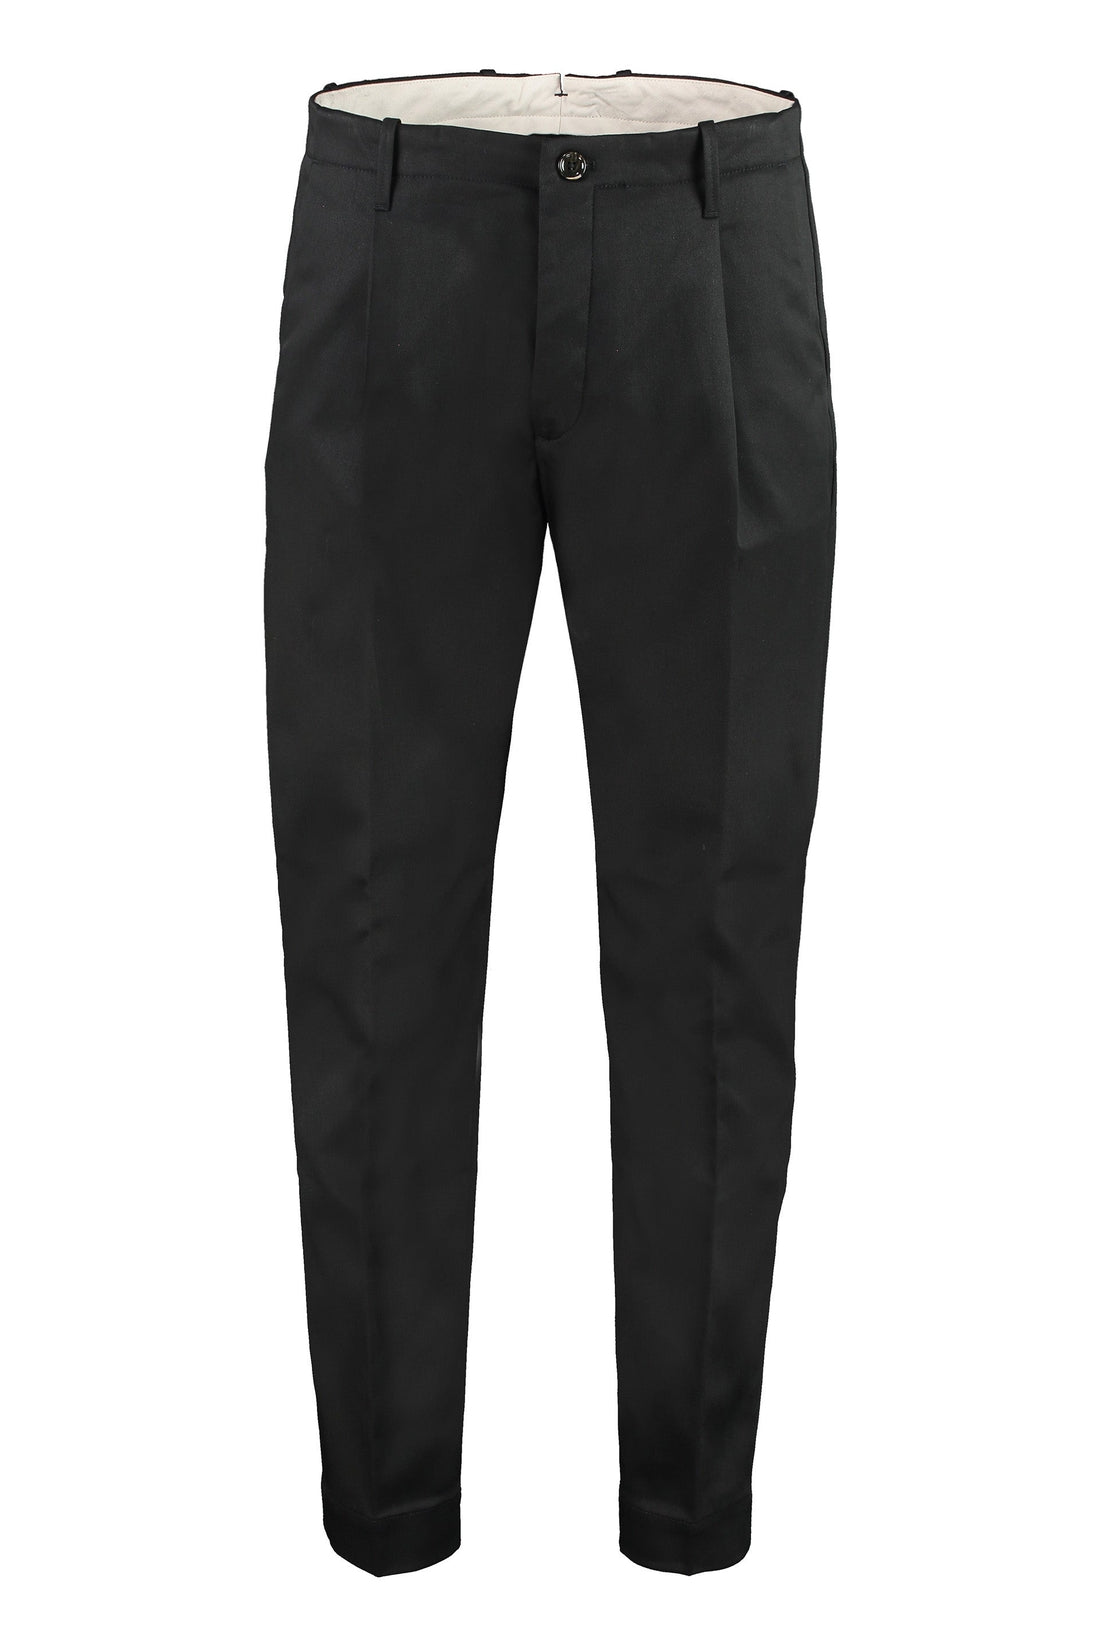 Nine in the Morning-OUTLET-SALE-Slim fit chino trousers-ARCHIVIST